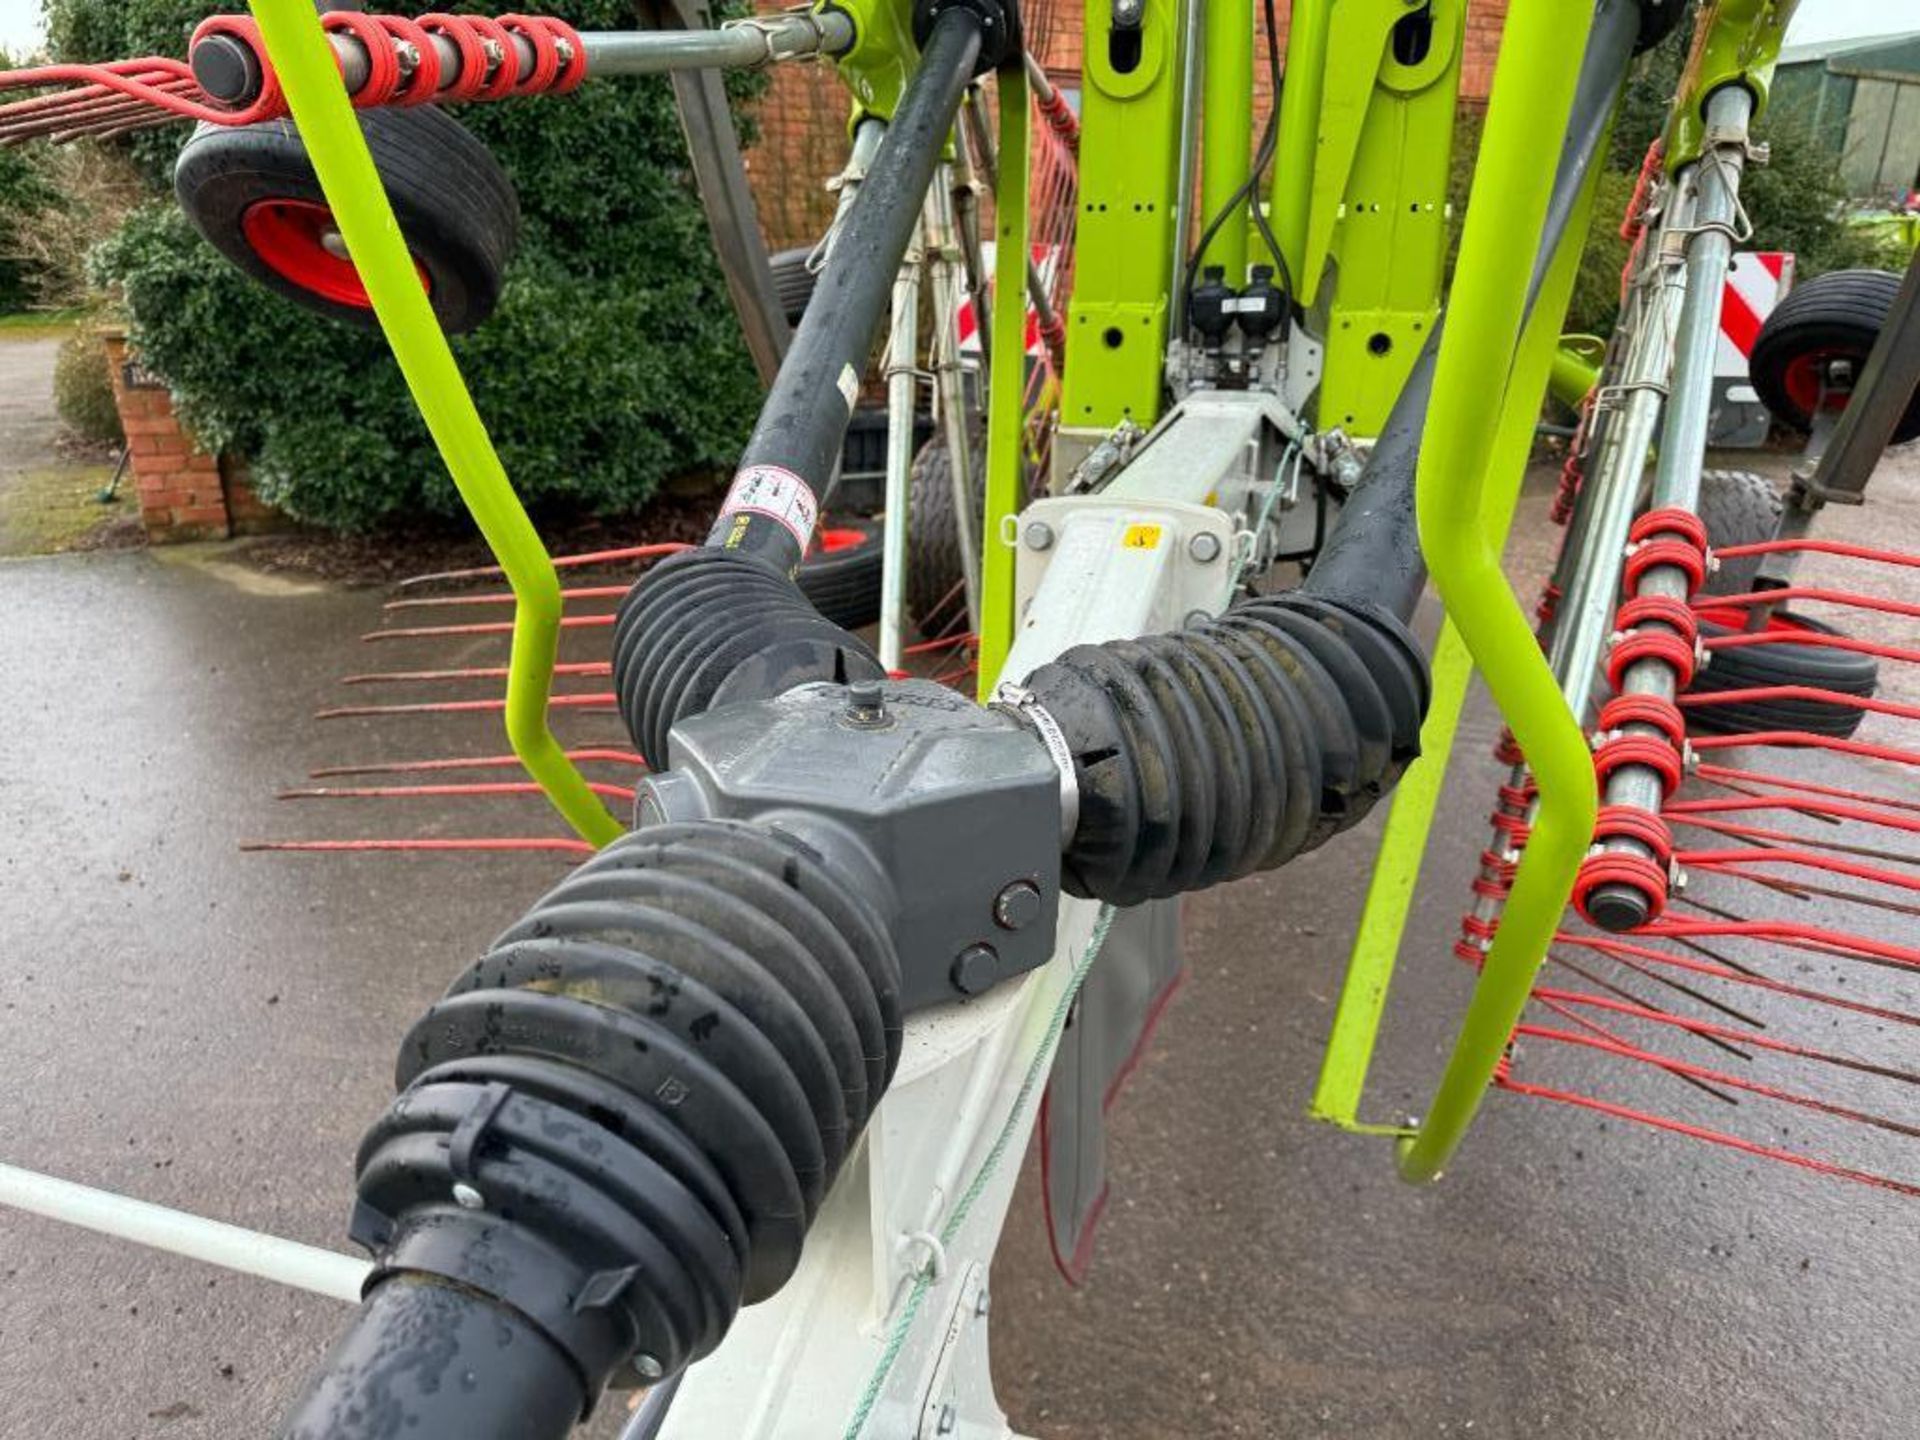 2019 Claas Liner 2900 twin rotor hydraulic folding rake on 15.0/55-17 wheels and tyres. Serial No: W - Image 13 of 14